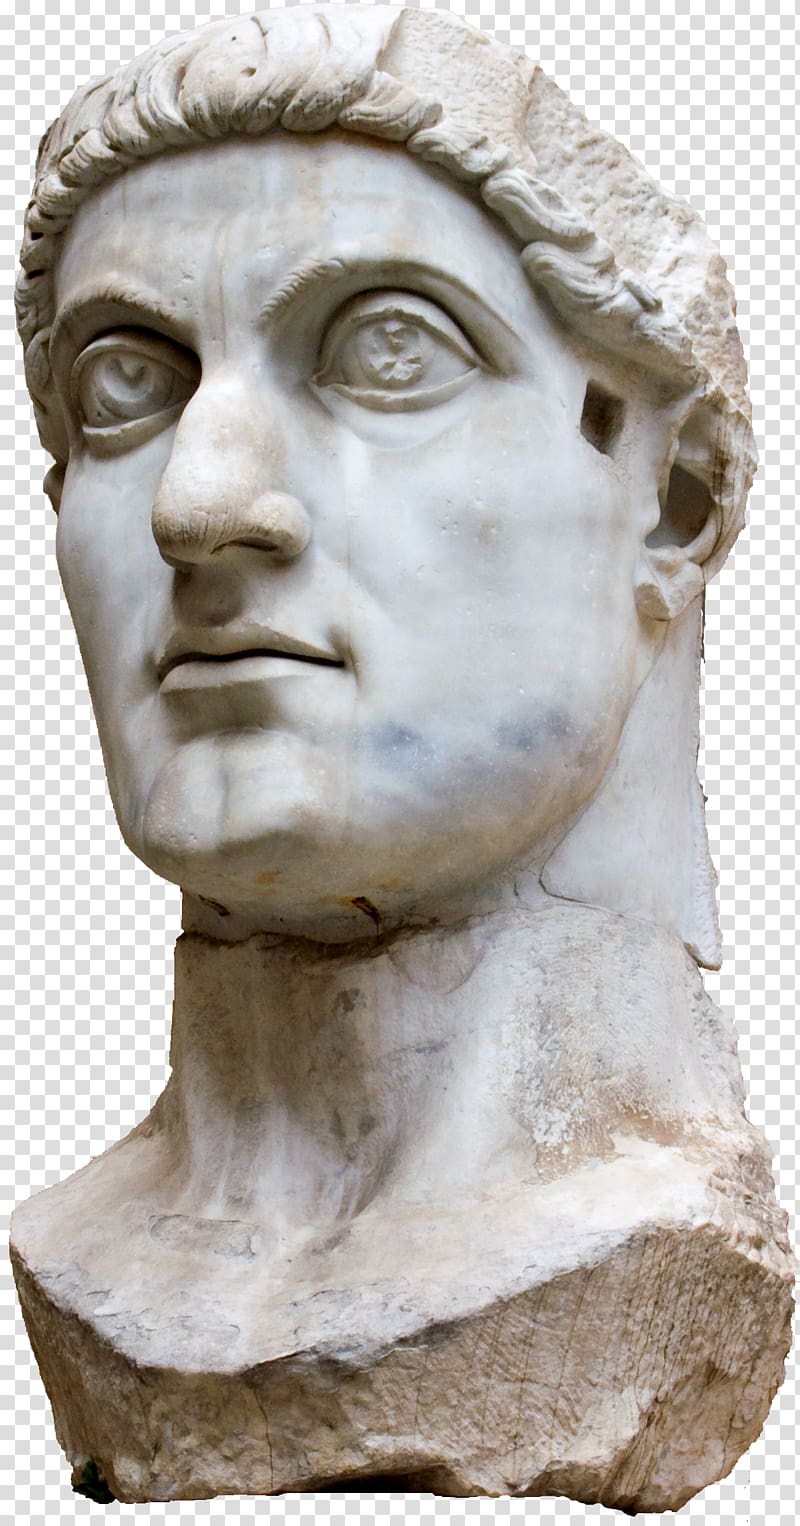 Constantine the Great Roman Empire Constantinople Roman emperor Edict of Milan, colossus of rhodes transparent background PNG clipart